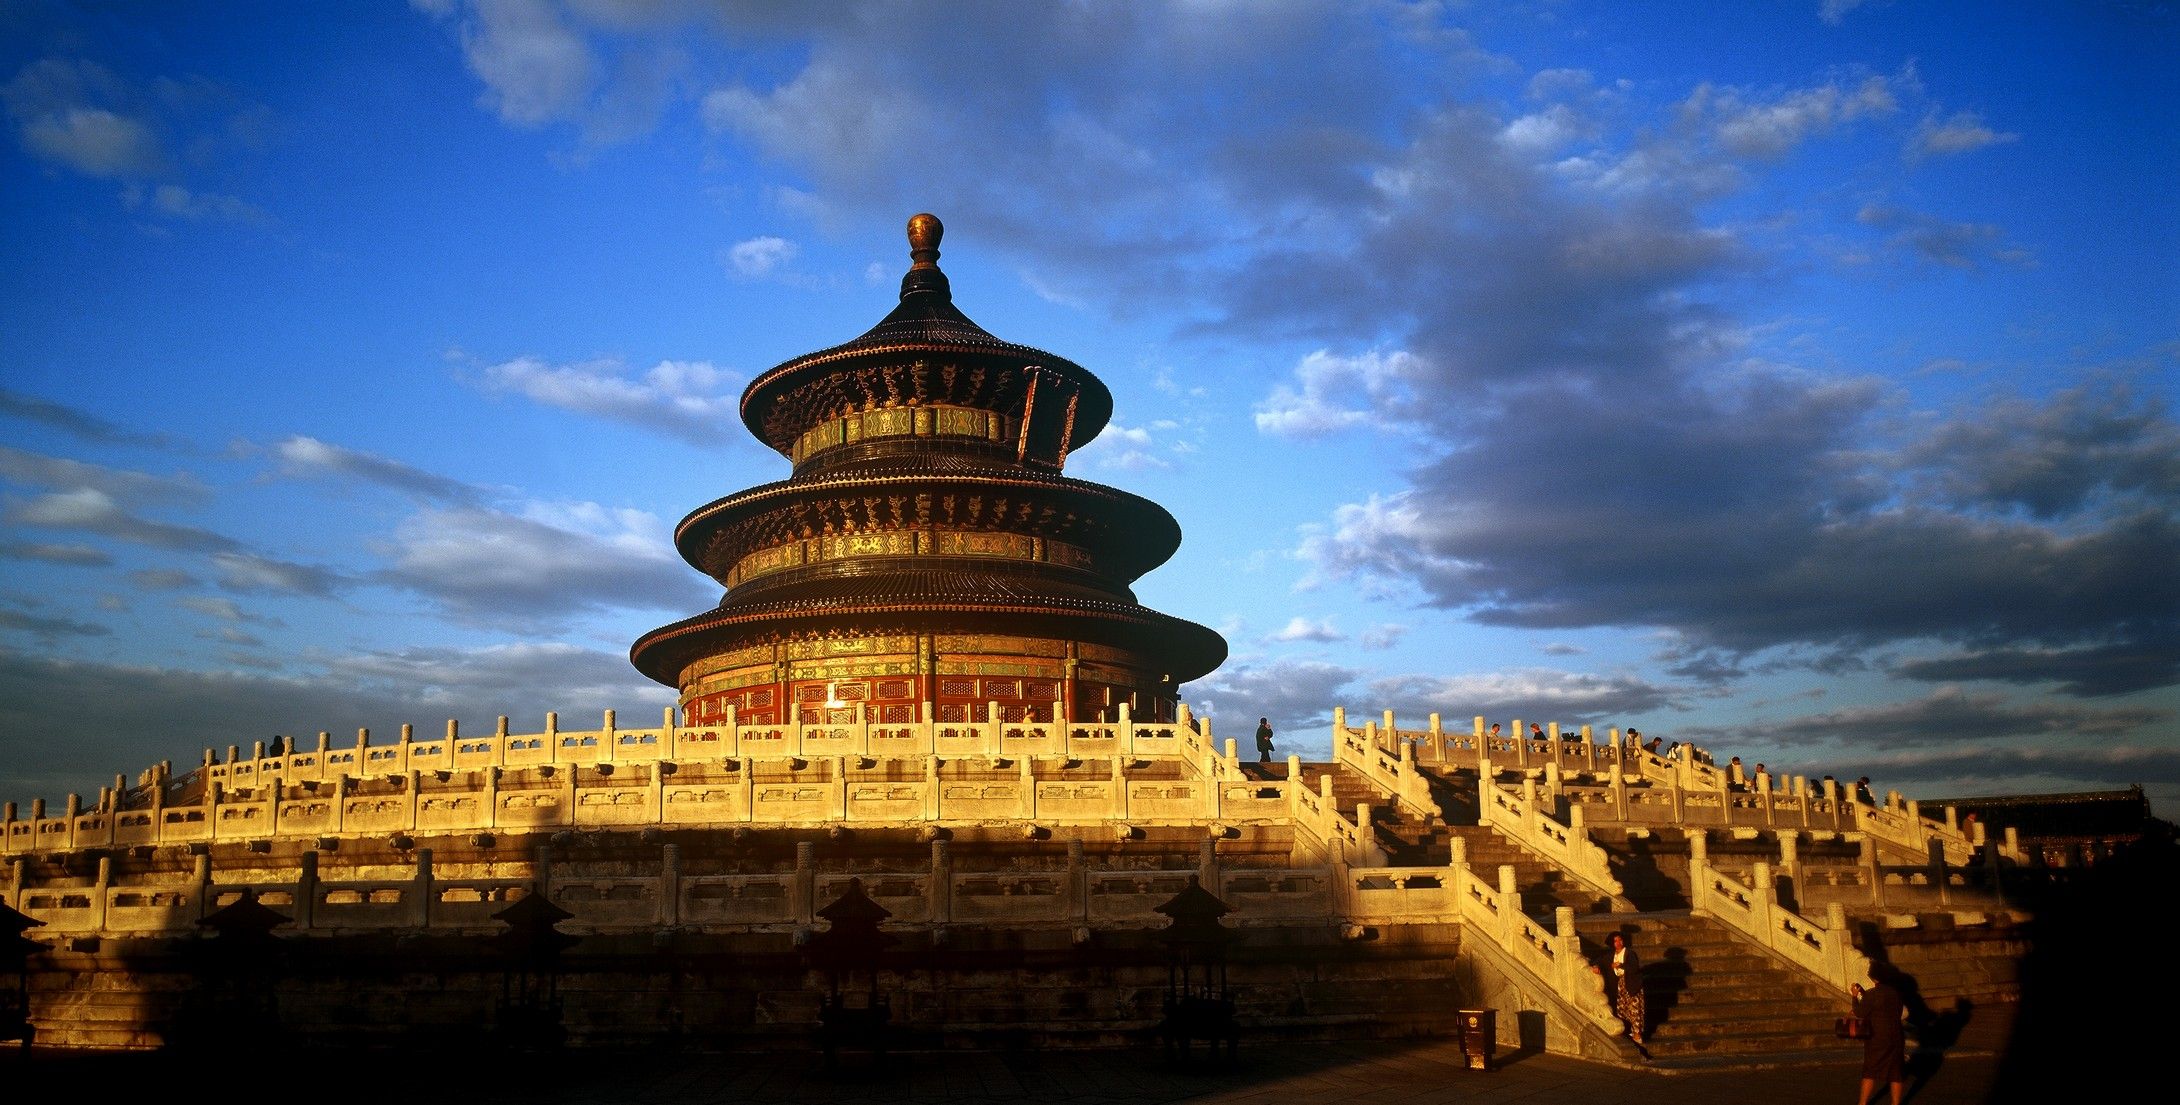 Built in 1420 A.D. during the Ming Dynasty to offer sacrifice to Heaven, Temple of Heaven served as a vast sacred. Adventure tours, Temple of heaven, China world